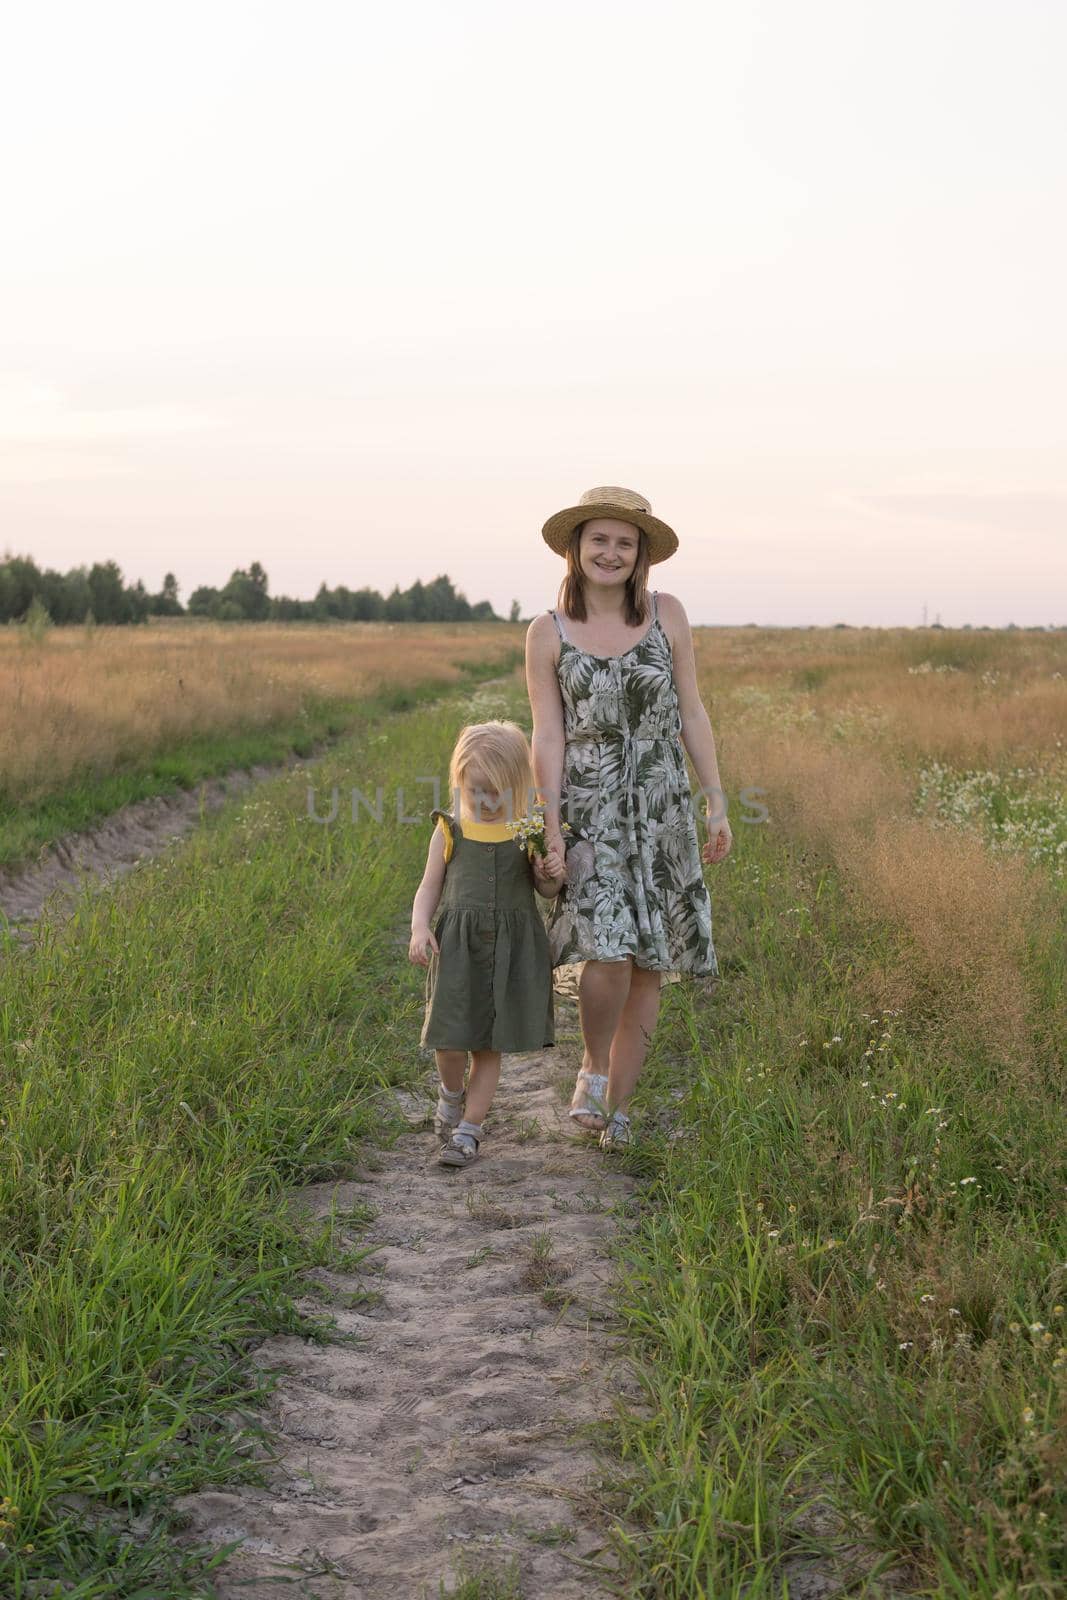 Mom and daughter walk through a chamomile field, and collect a bouquet of flowers. The concept of family relations, nature walks, freedom and a healthy lifestyle. by Annu1tochka